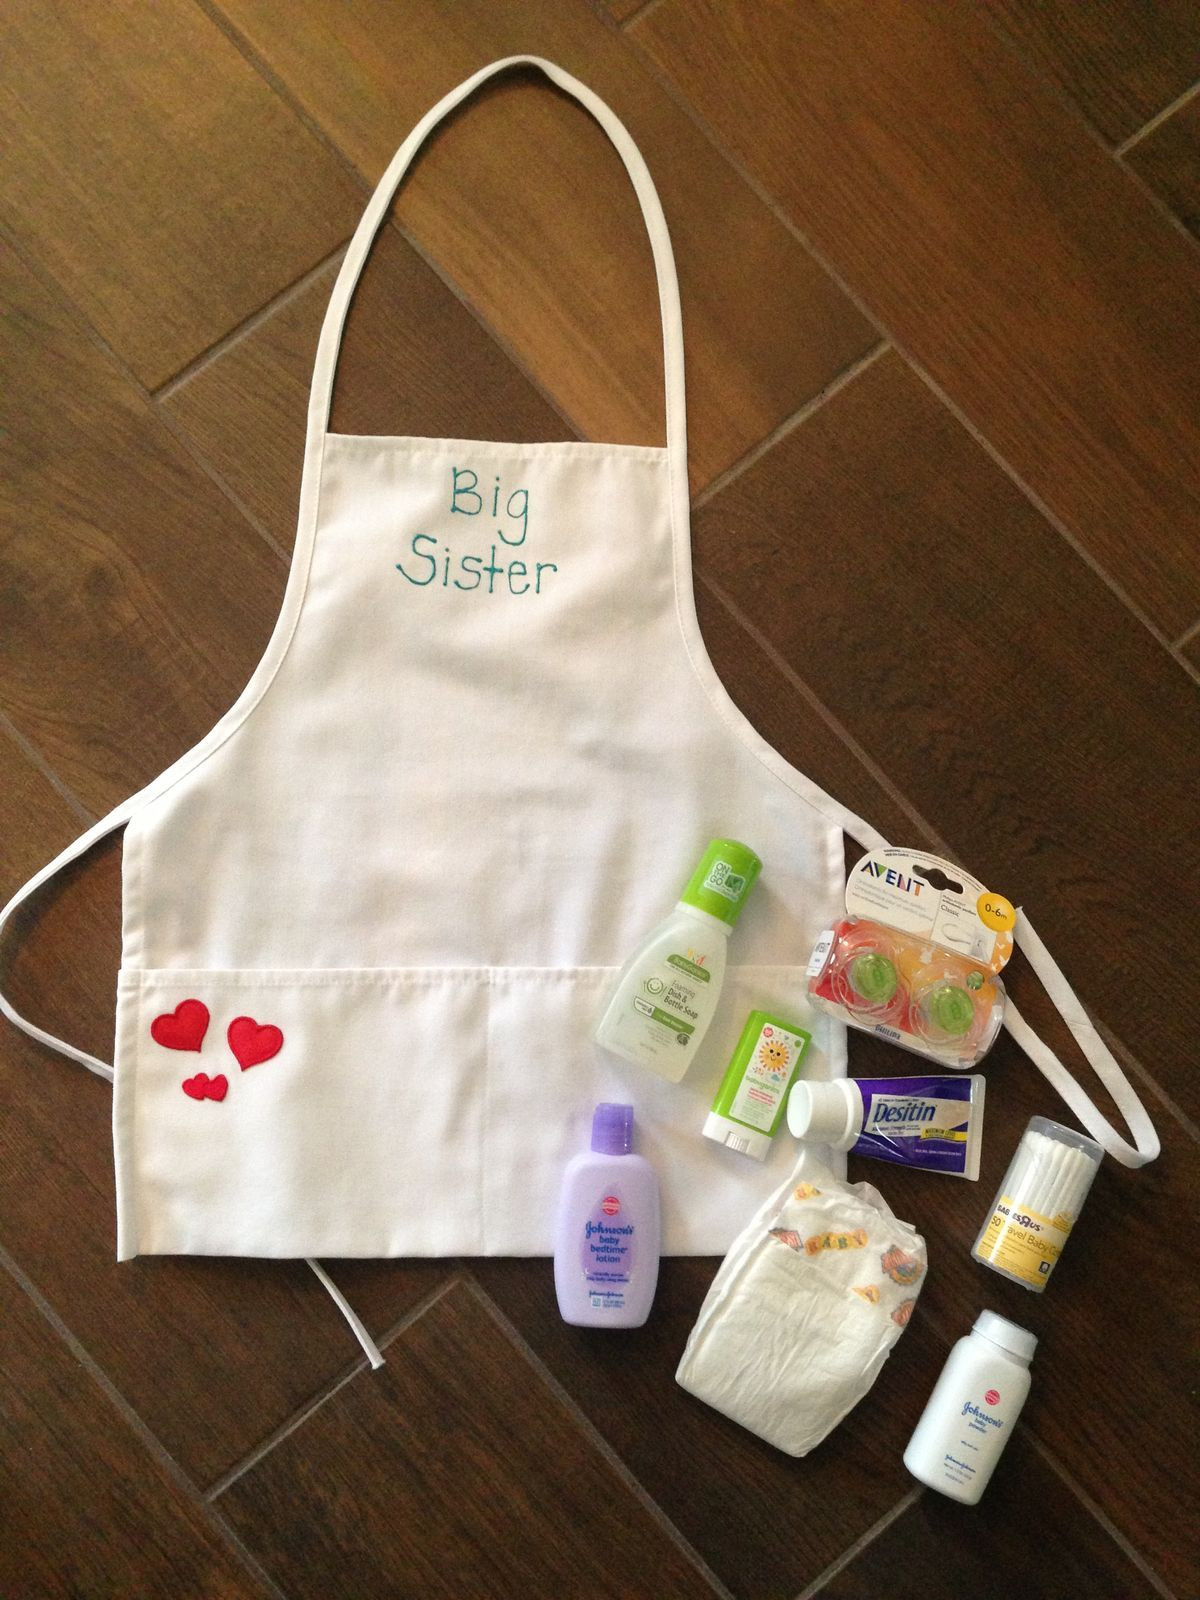 Big Brother Gift Ideas From Baby
 big sister apron basket